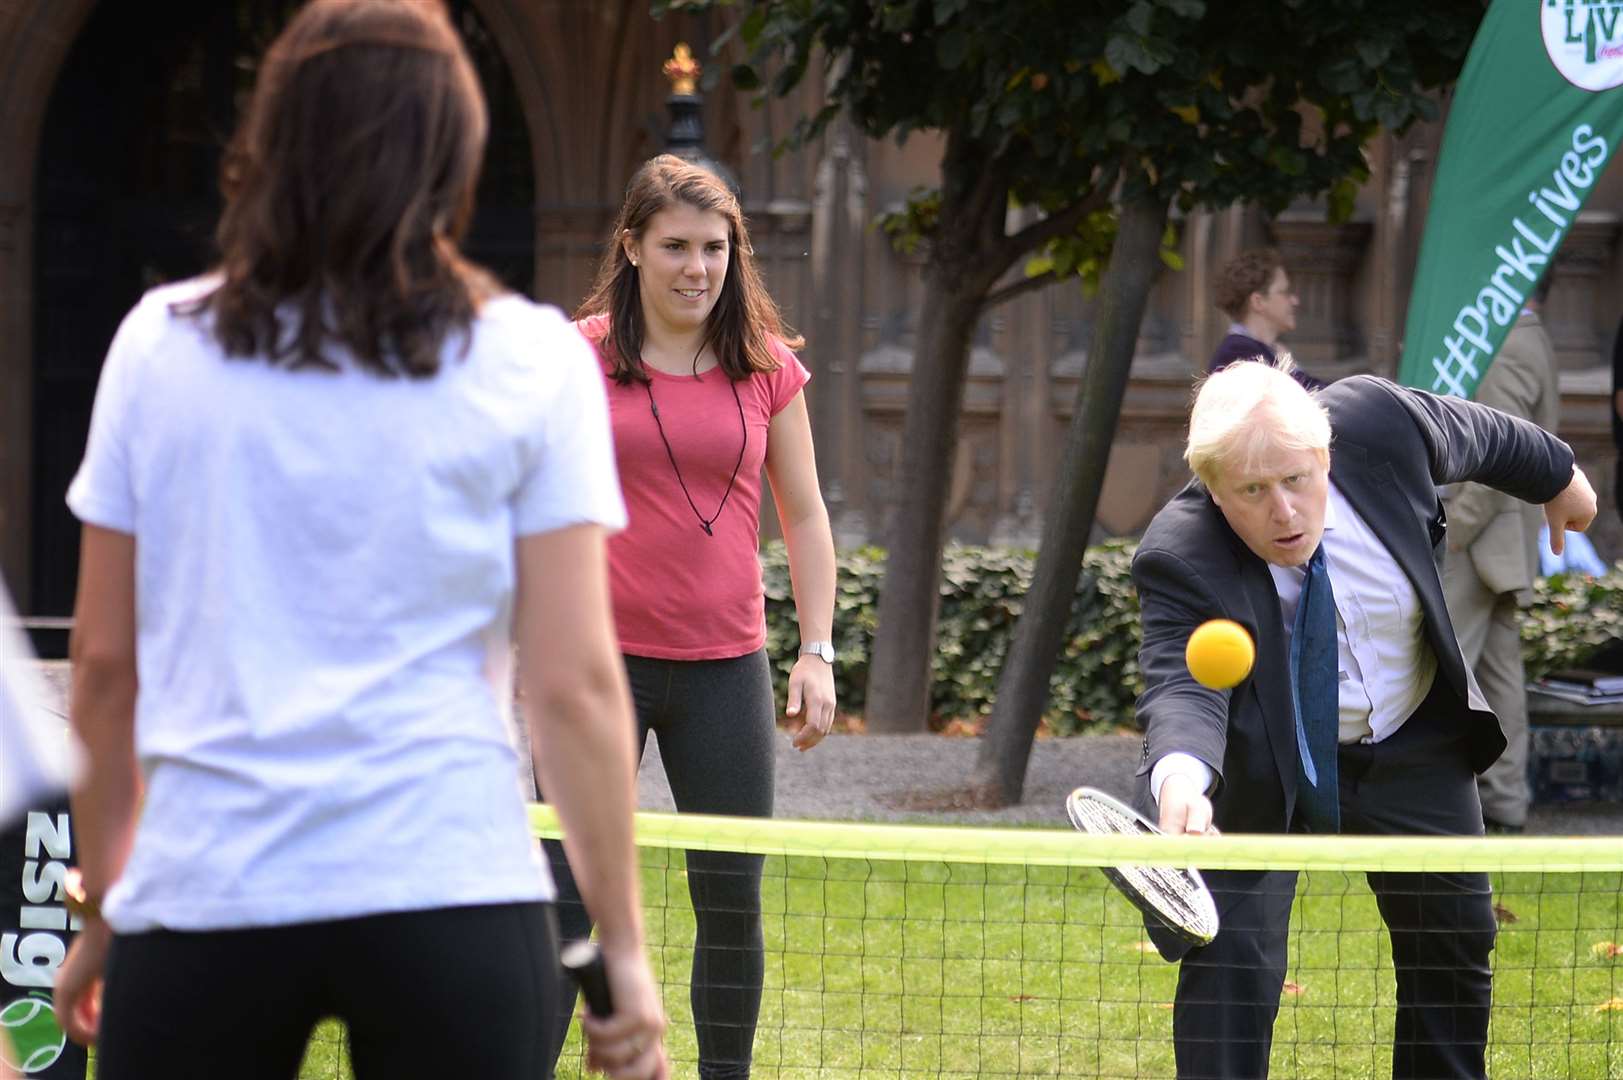 Tennis has long been a passion of the Prime Minister… (Stefan Rousseau/PA)